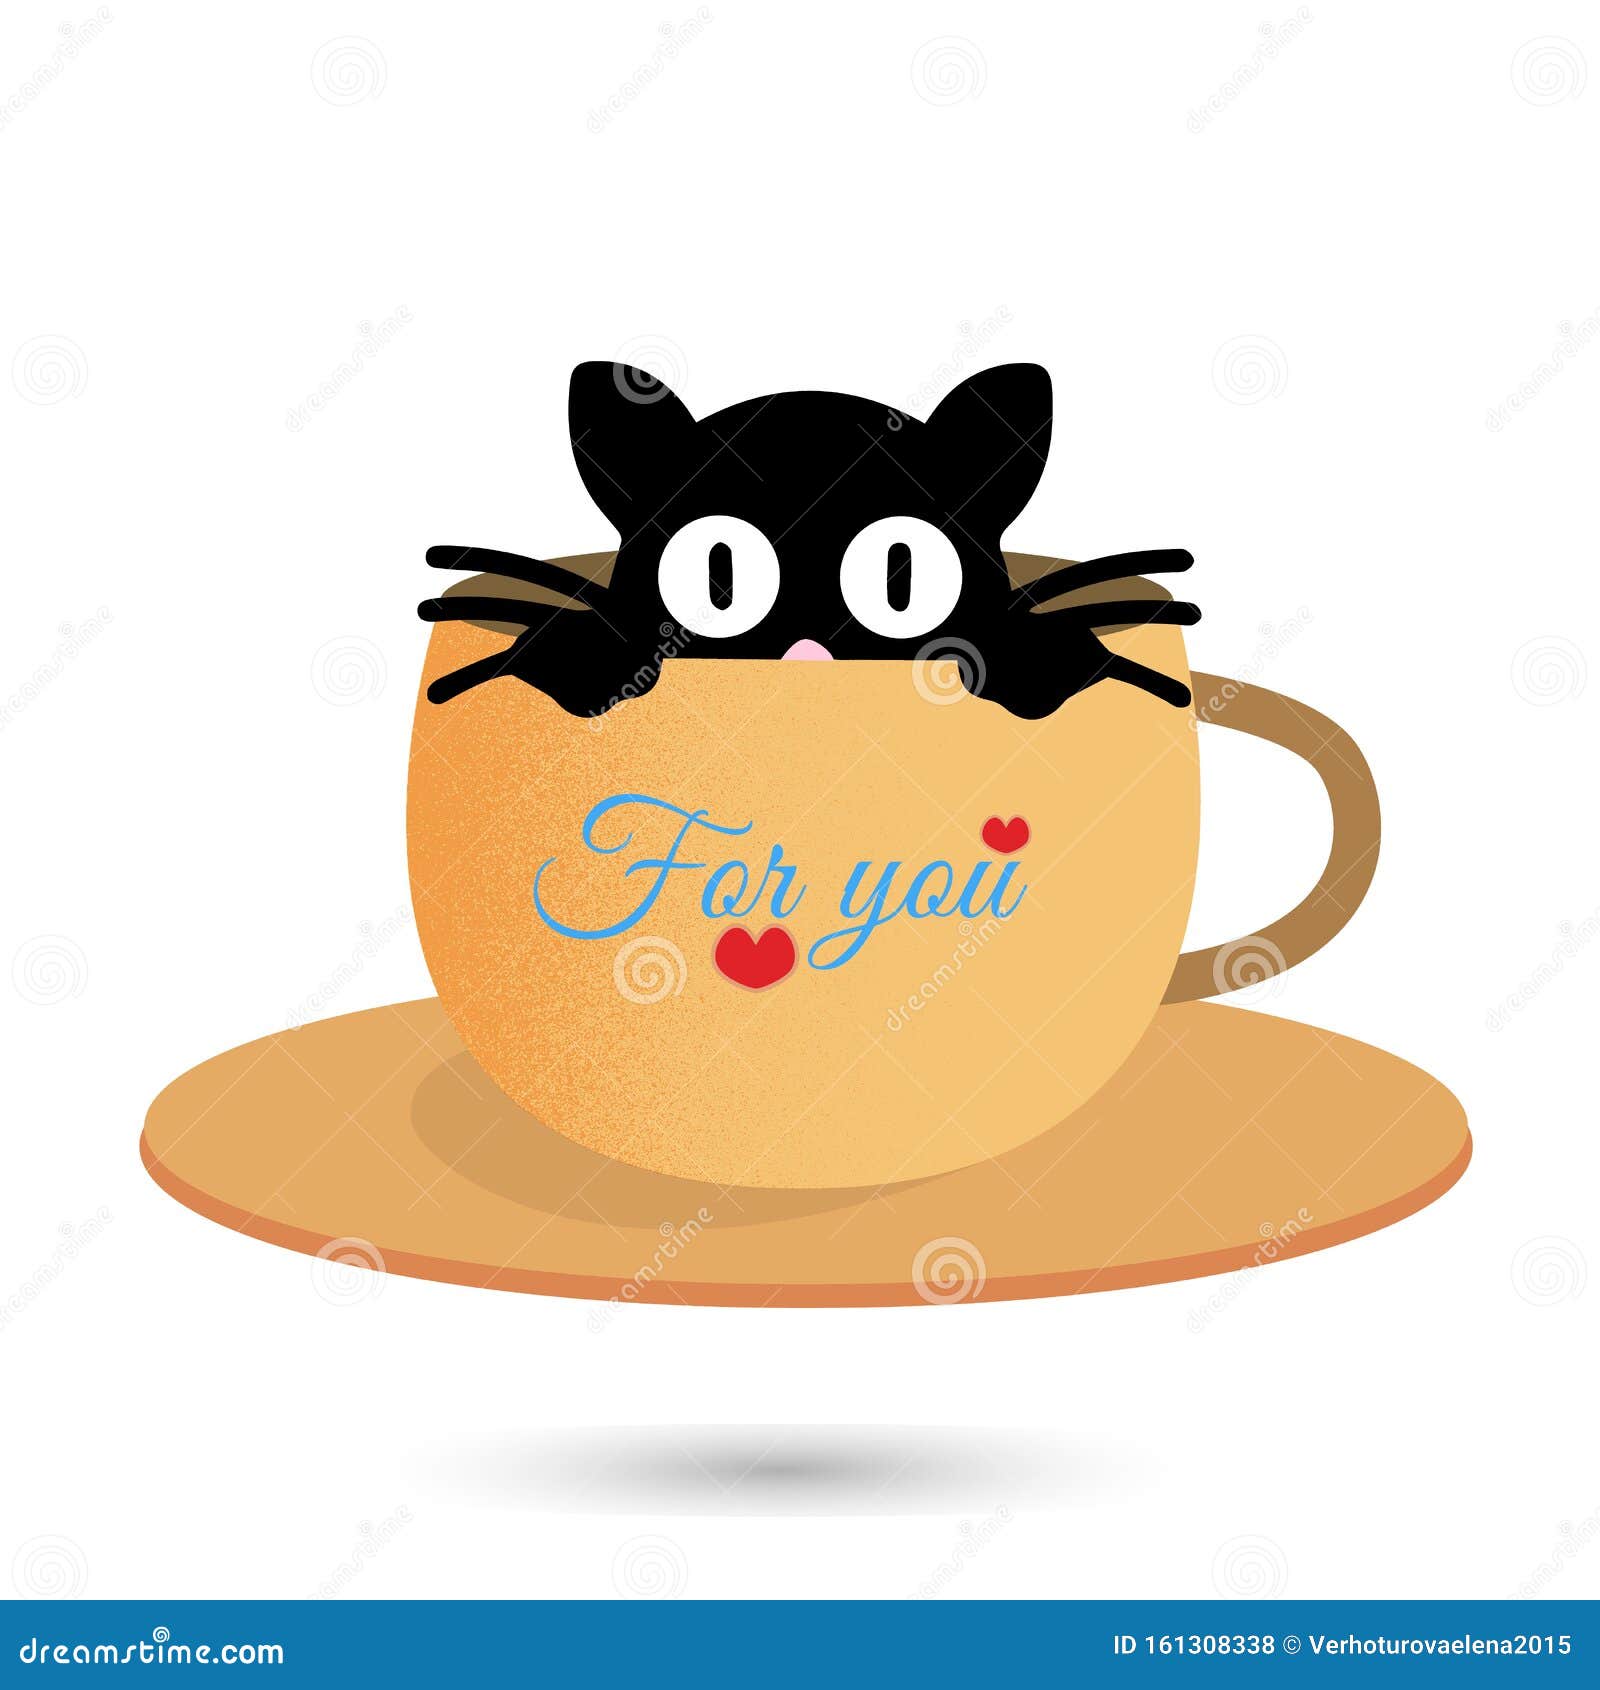 Black Cat In Cup For Wallpaper Design Sweet World Poster The Head Of A Black Cat Peeks Out Of A Cup The Inscription Stock Vector Illustration Of Element Match 161308338